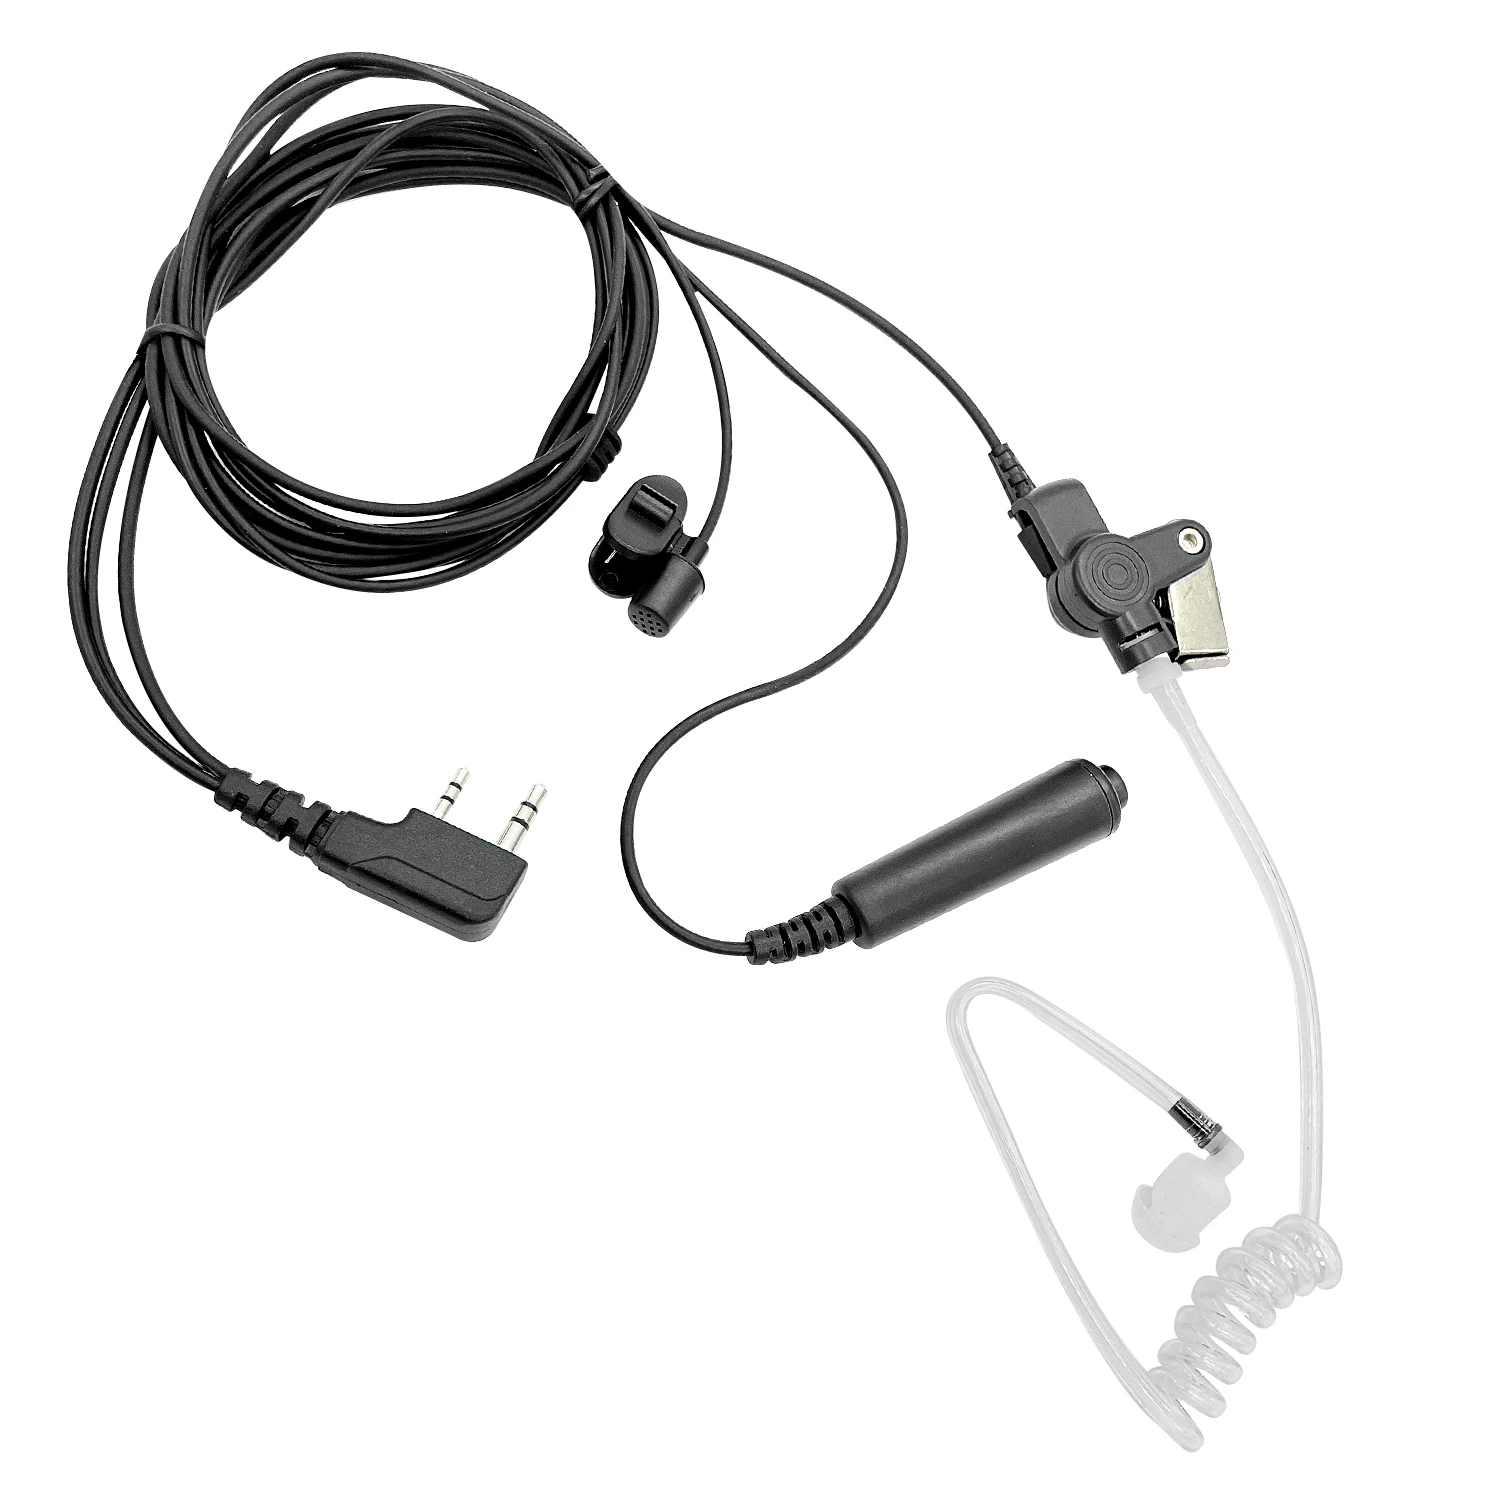 Earpiece walkie talkie Compatible with the following Models for Kenwood/Baofeng Two Way Radio:TK-208/220/240/240D/248/250/260